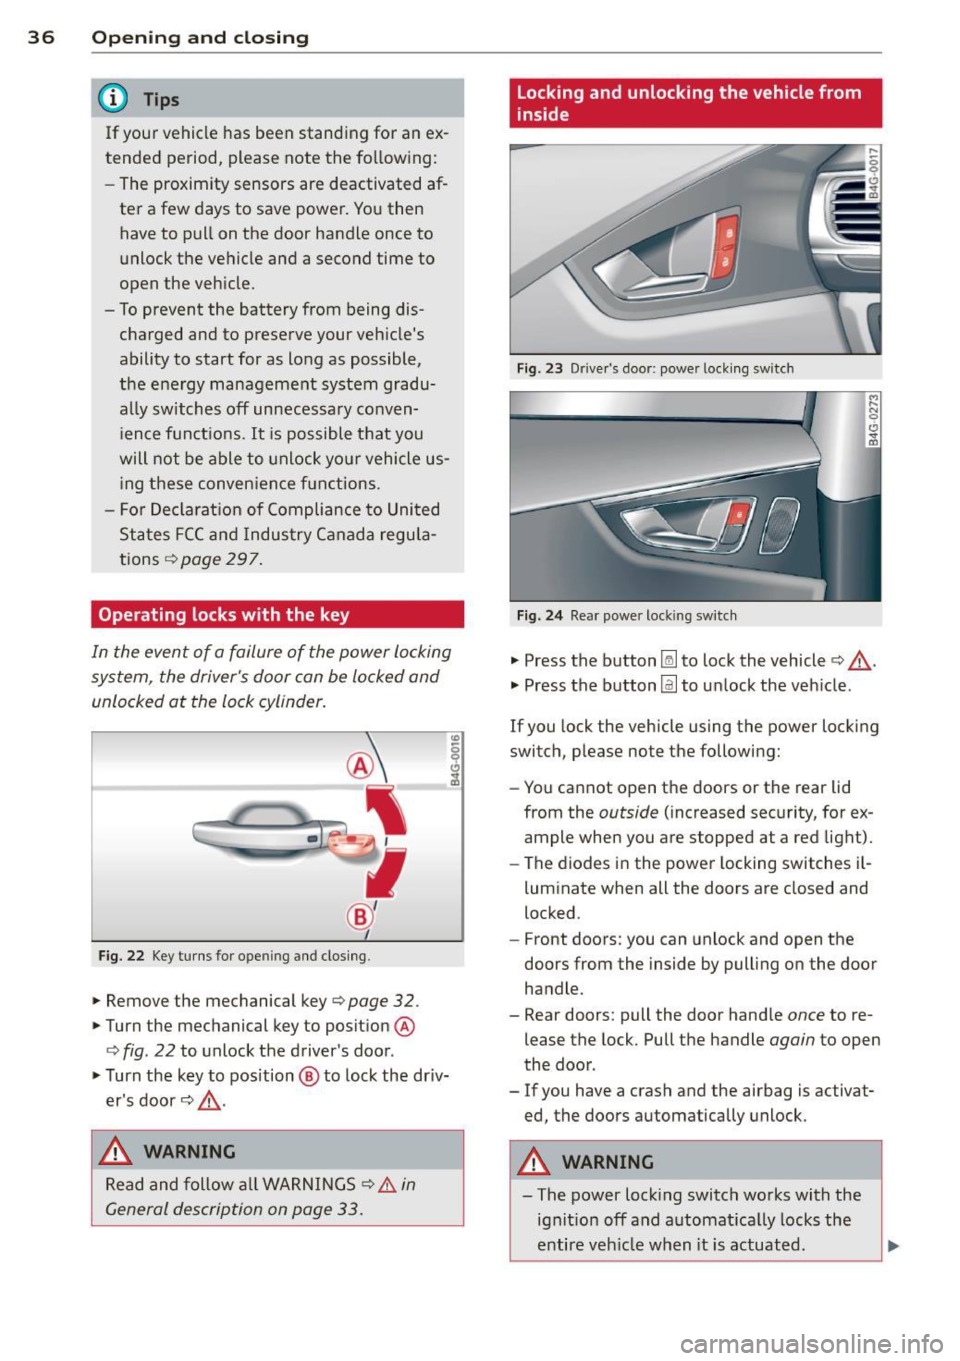 AUDI S7 2015 Owners Guide 36  Opening and  clo sing 
@ Tips 
If your  vehicle  has  been  standing  for  an  ex­
tended  period,  please  note  the  following: 
- The  proximity  sensors  are  deactivated  af-
ter  a  few  da